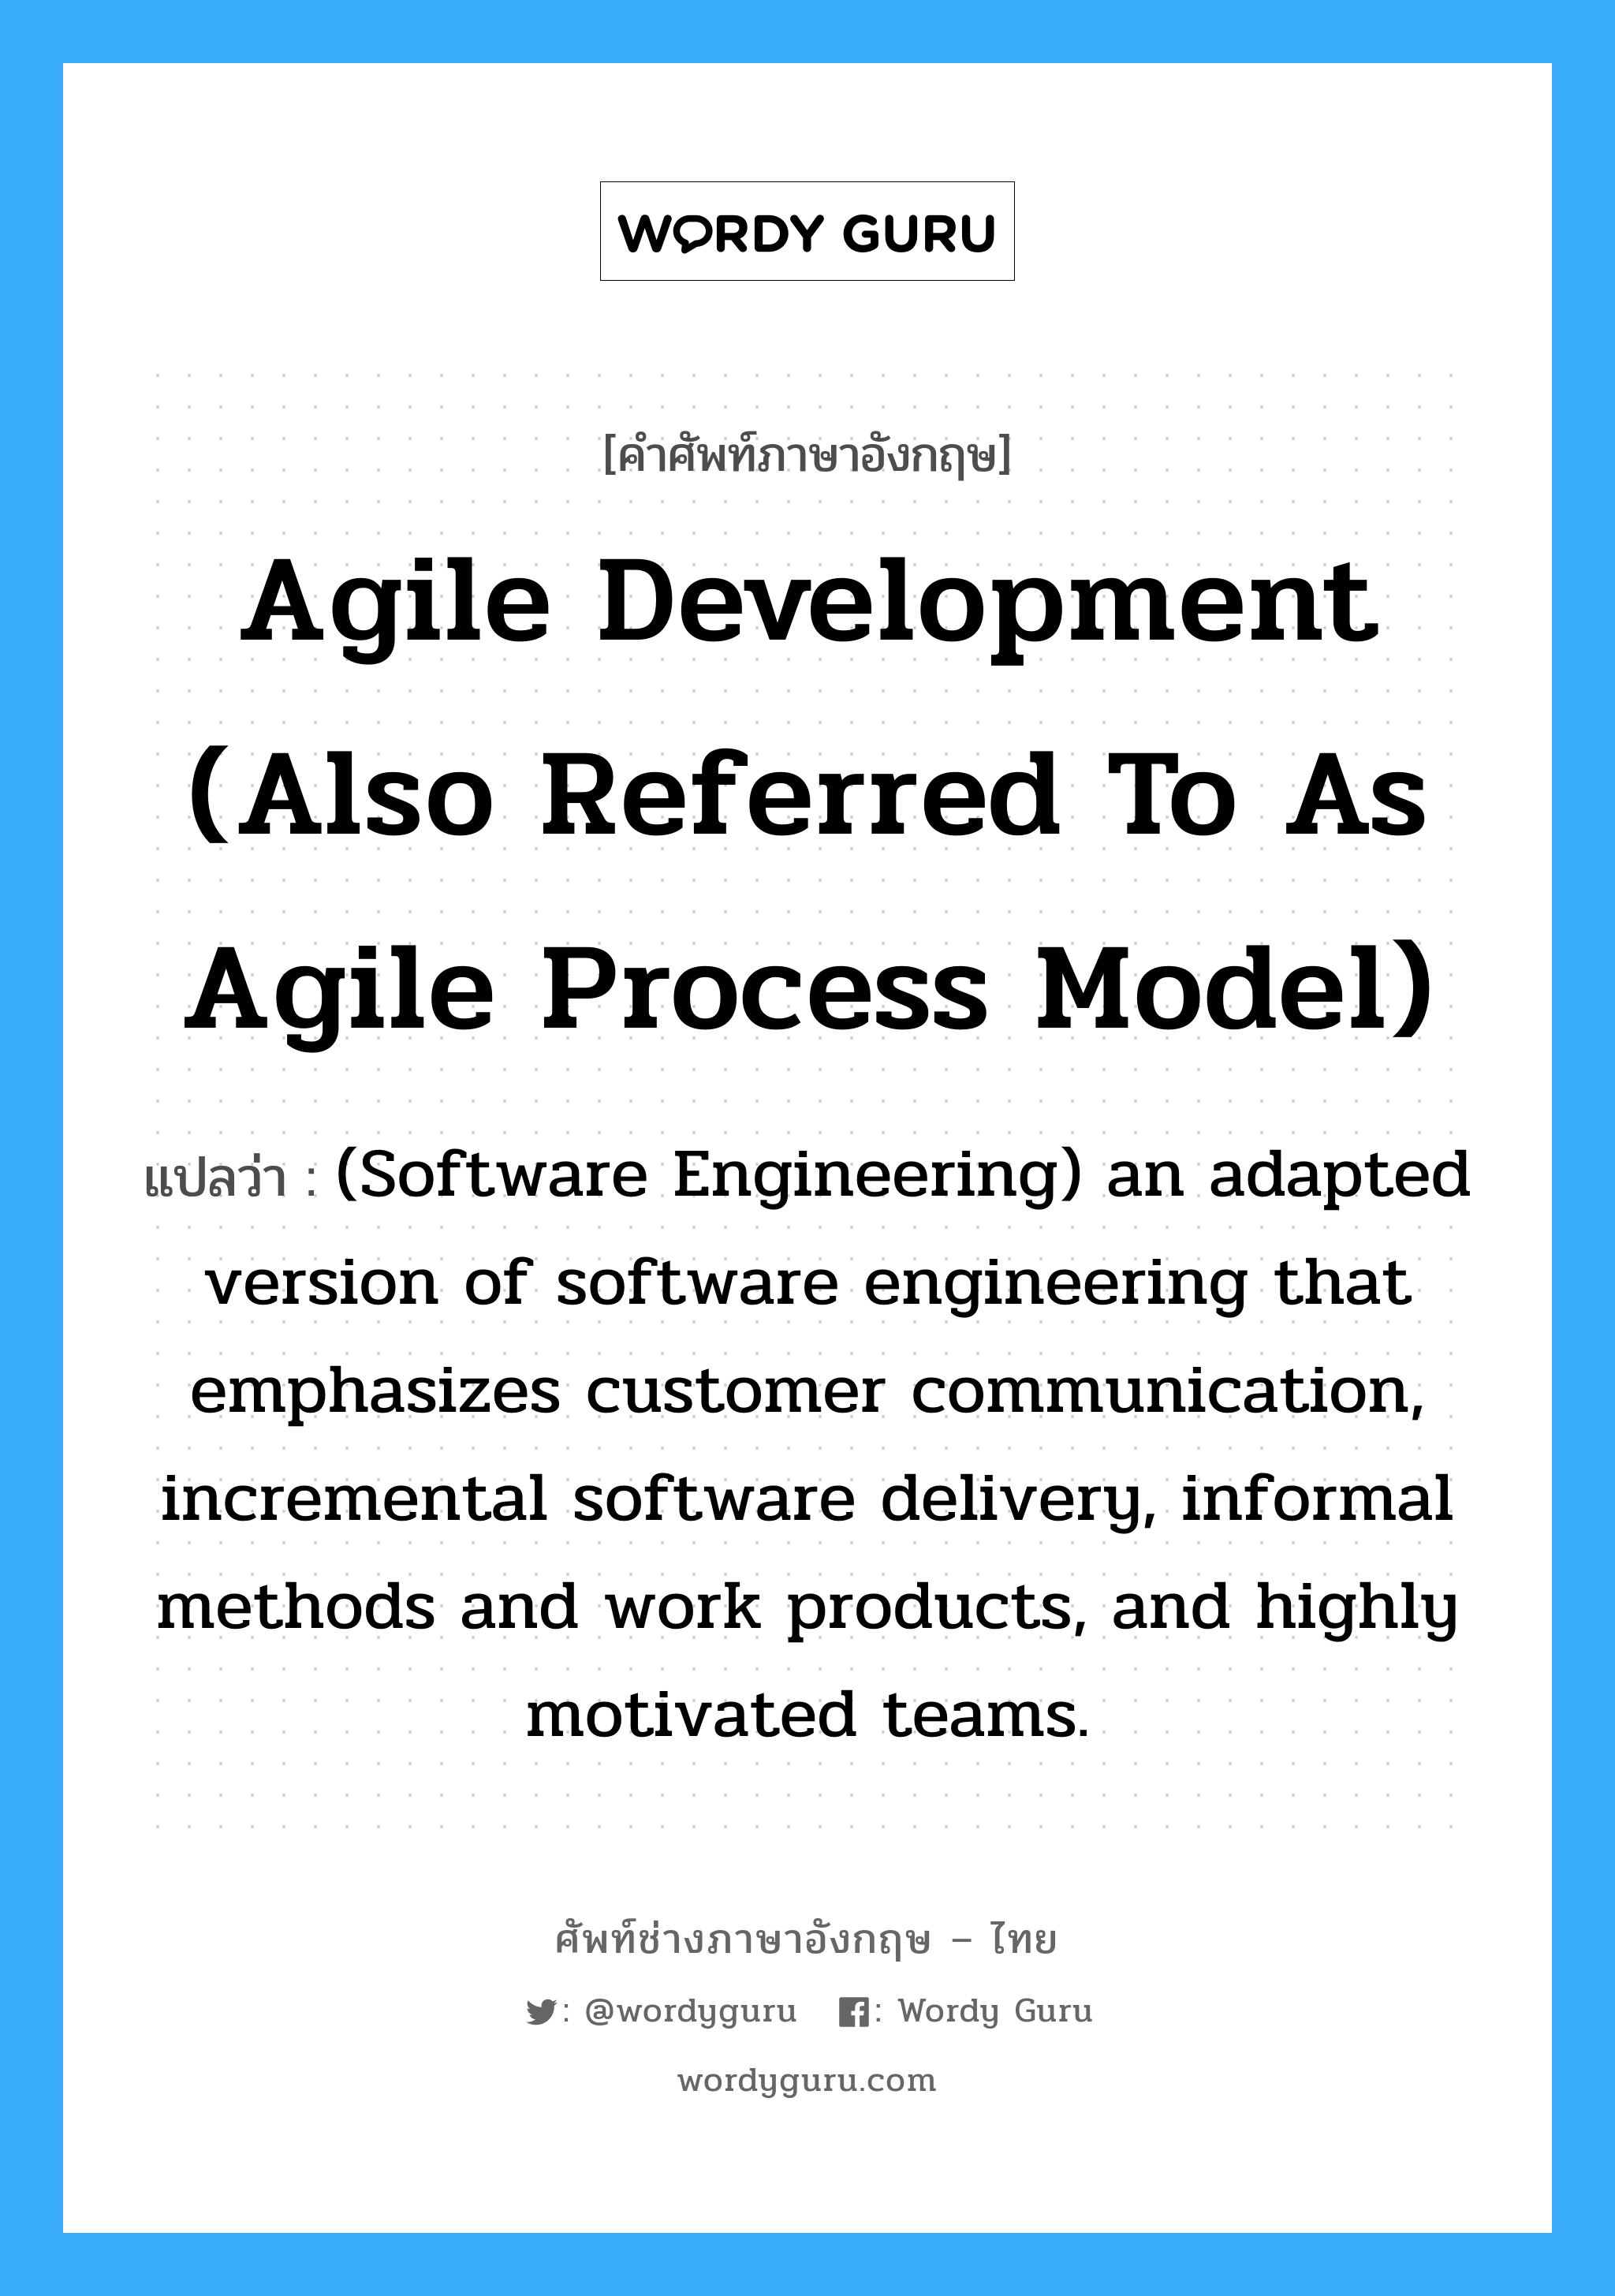 Agile development (also referred to as agile process model) แปลว่า?, คำศัพท์ช่างภาษาอังกฤษ - ไทย Agile development (also referred to as agile process model) คำศัพท์ภาษาอังกฤษ Agile development (also referred to as agile process model) แปลว่า (Software Engineering) an adapted version of software engineering that emphasizes customer communication, incremental software delivery, informal methods and work products, and highly motivated teams.